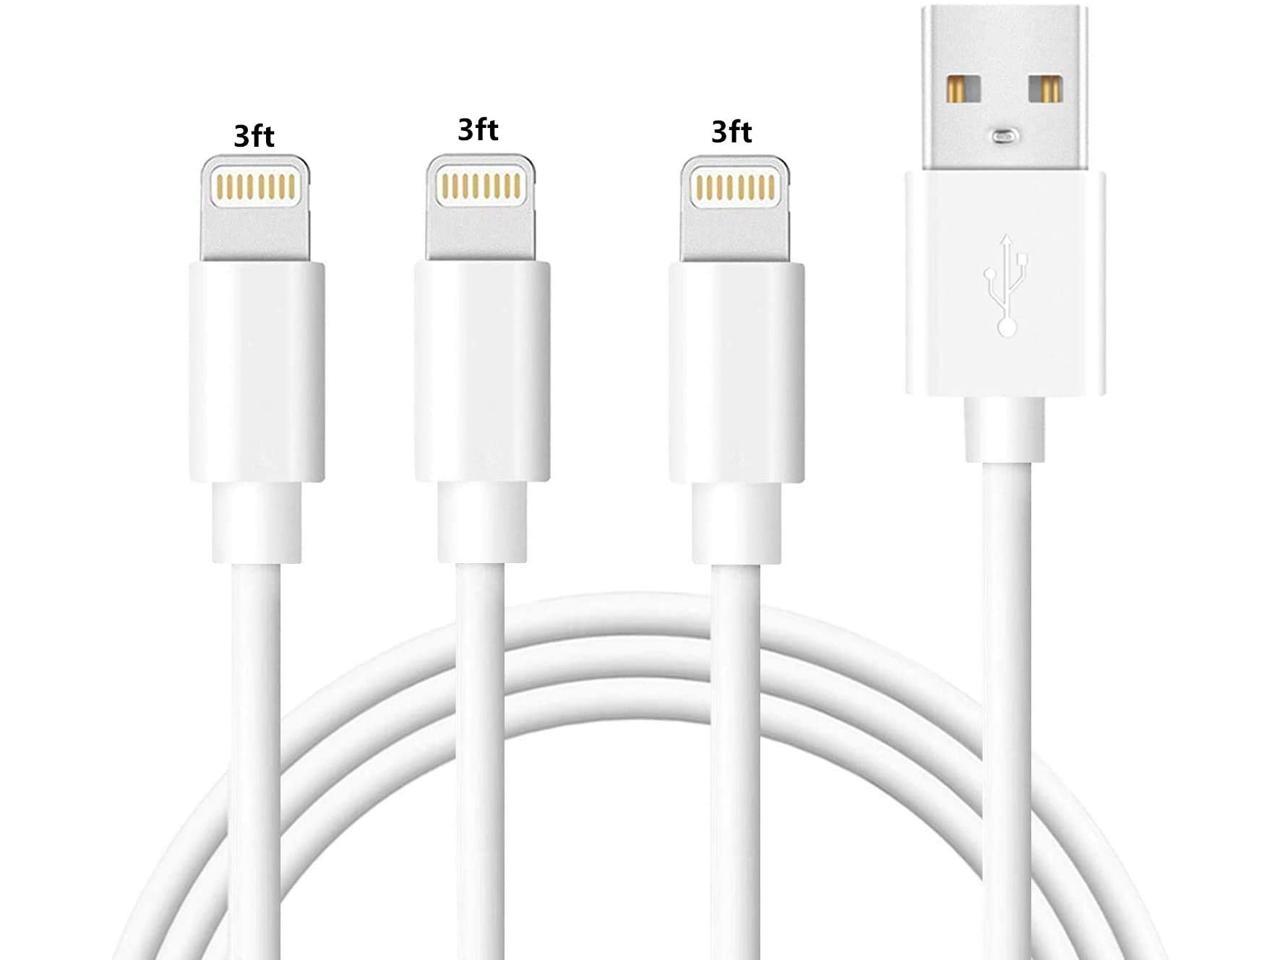 MFi Certified Lightning Cable Black Novtech 3Pack 6FT iPhone Cable Nylon Braided iPhone Charging Cord for iPhone 11 Pro XR Xs Max X 8 Plus 7 Plus 6S Plus 6 Plus 5S 5C 5 SE iPod iPad Air Pro 